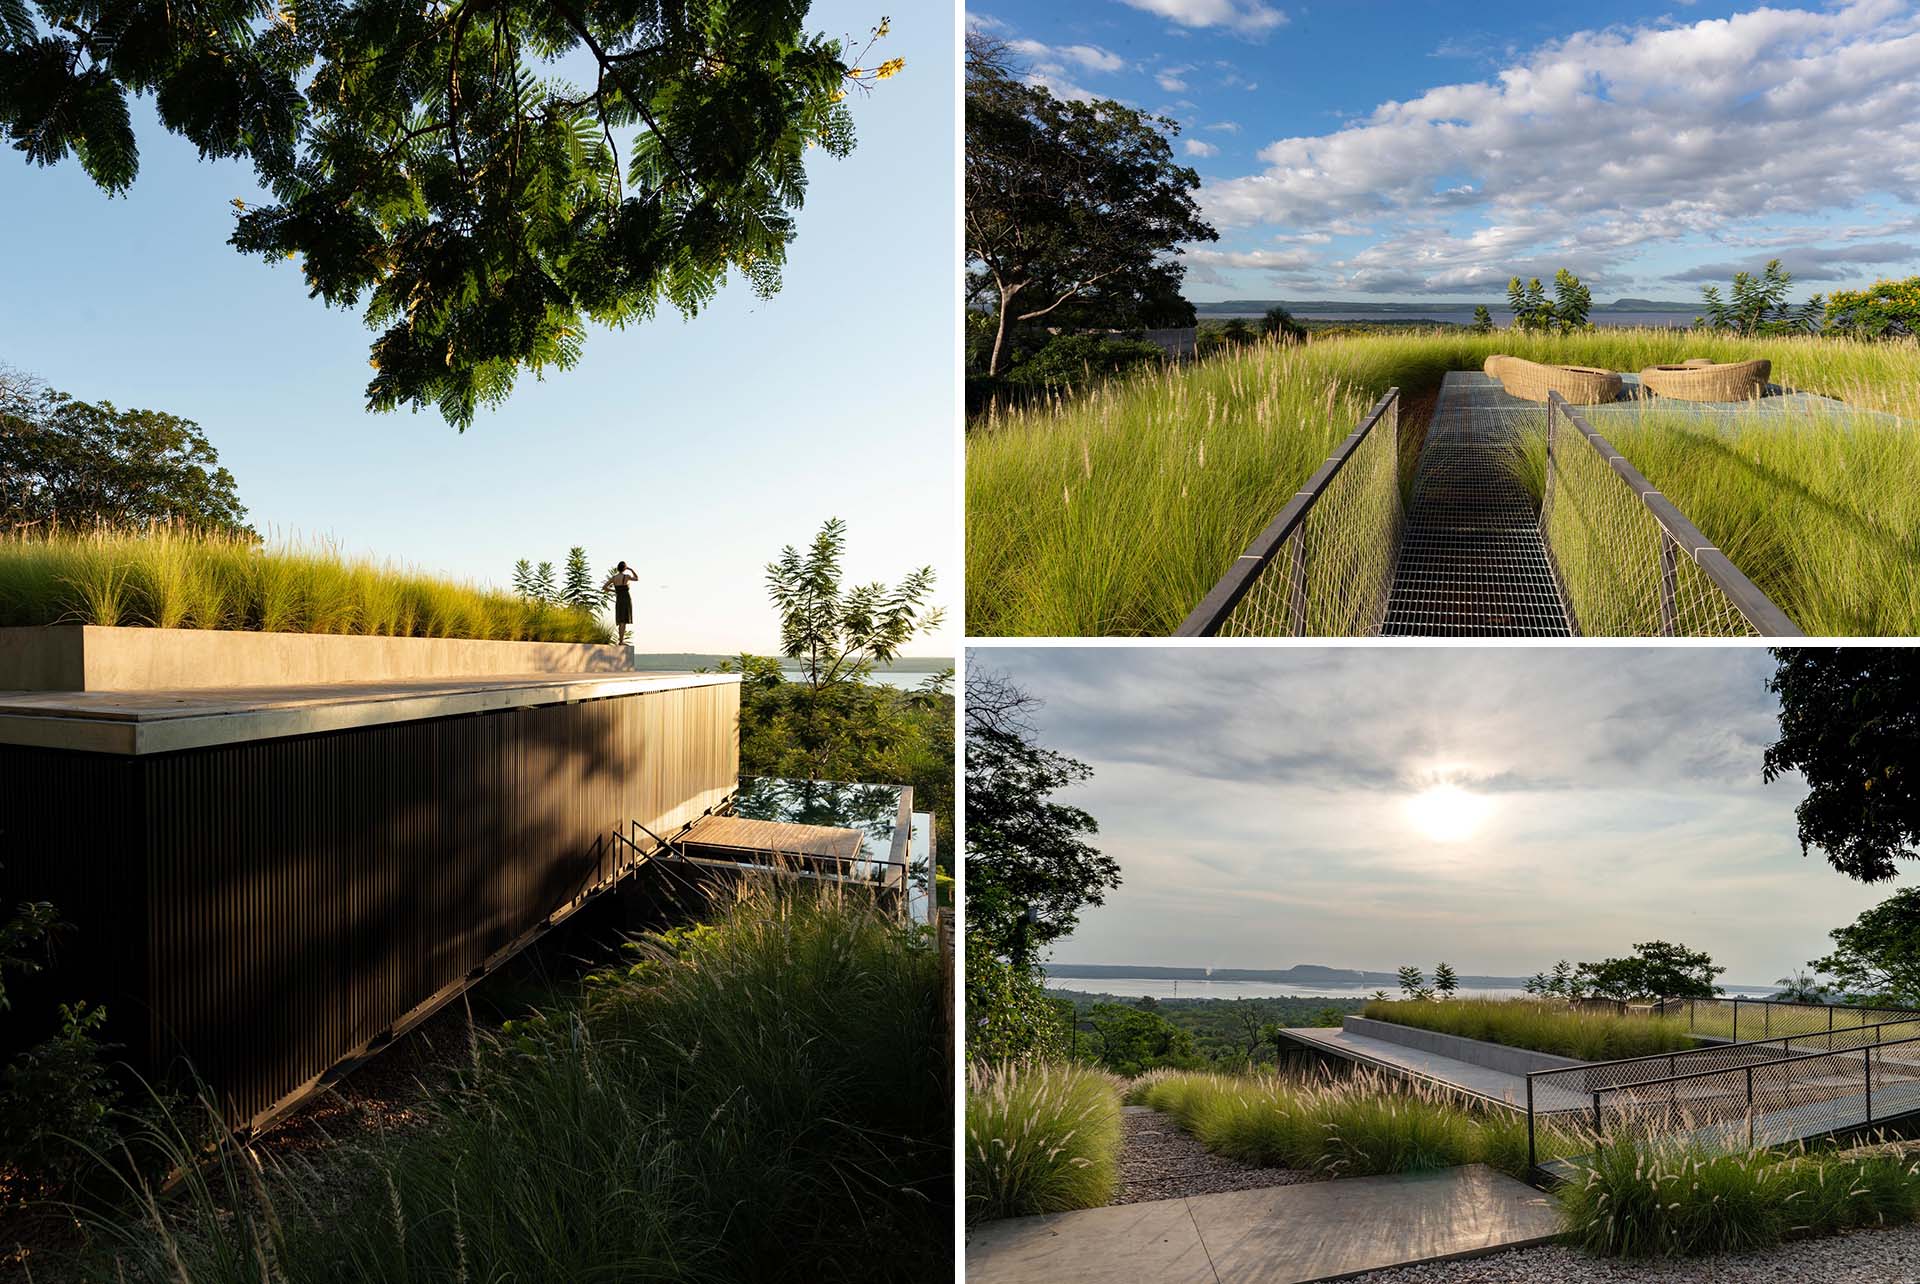 This modern rooftop patio is surrounded by grasses and is furnished with a pair of low day beds. From the rooftop, you can see the surrounding landscape and views of the water.